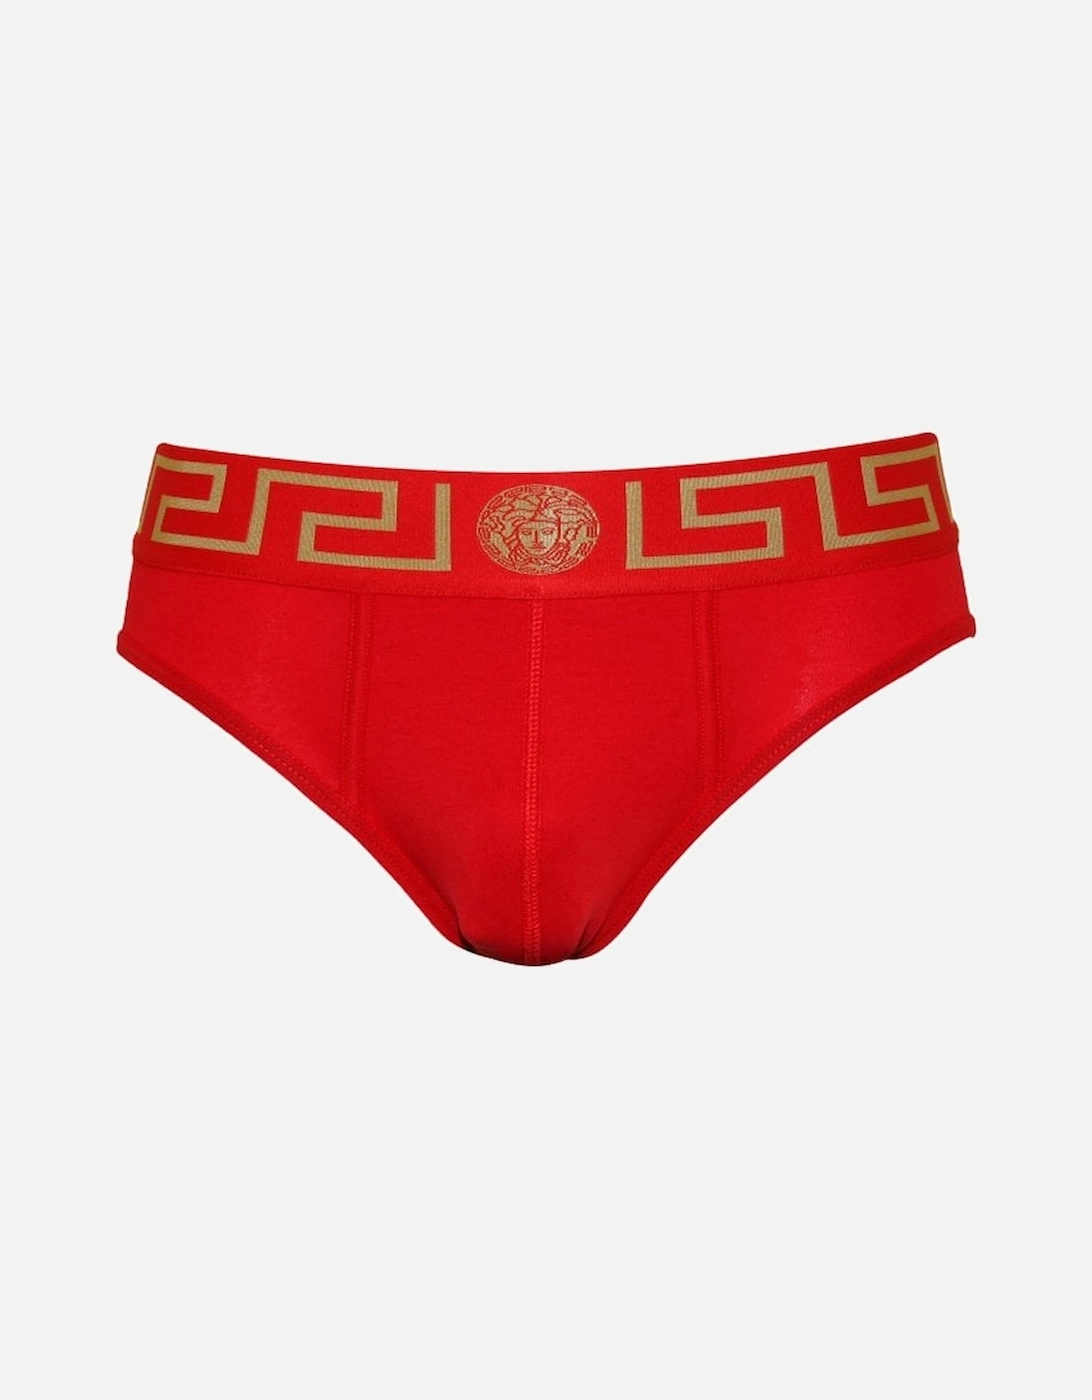 Iconic Greca Low-Rise Brief, Red/gold, 6 of 5